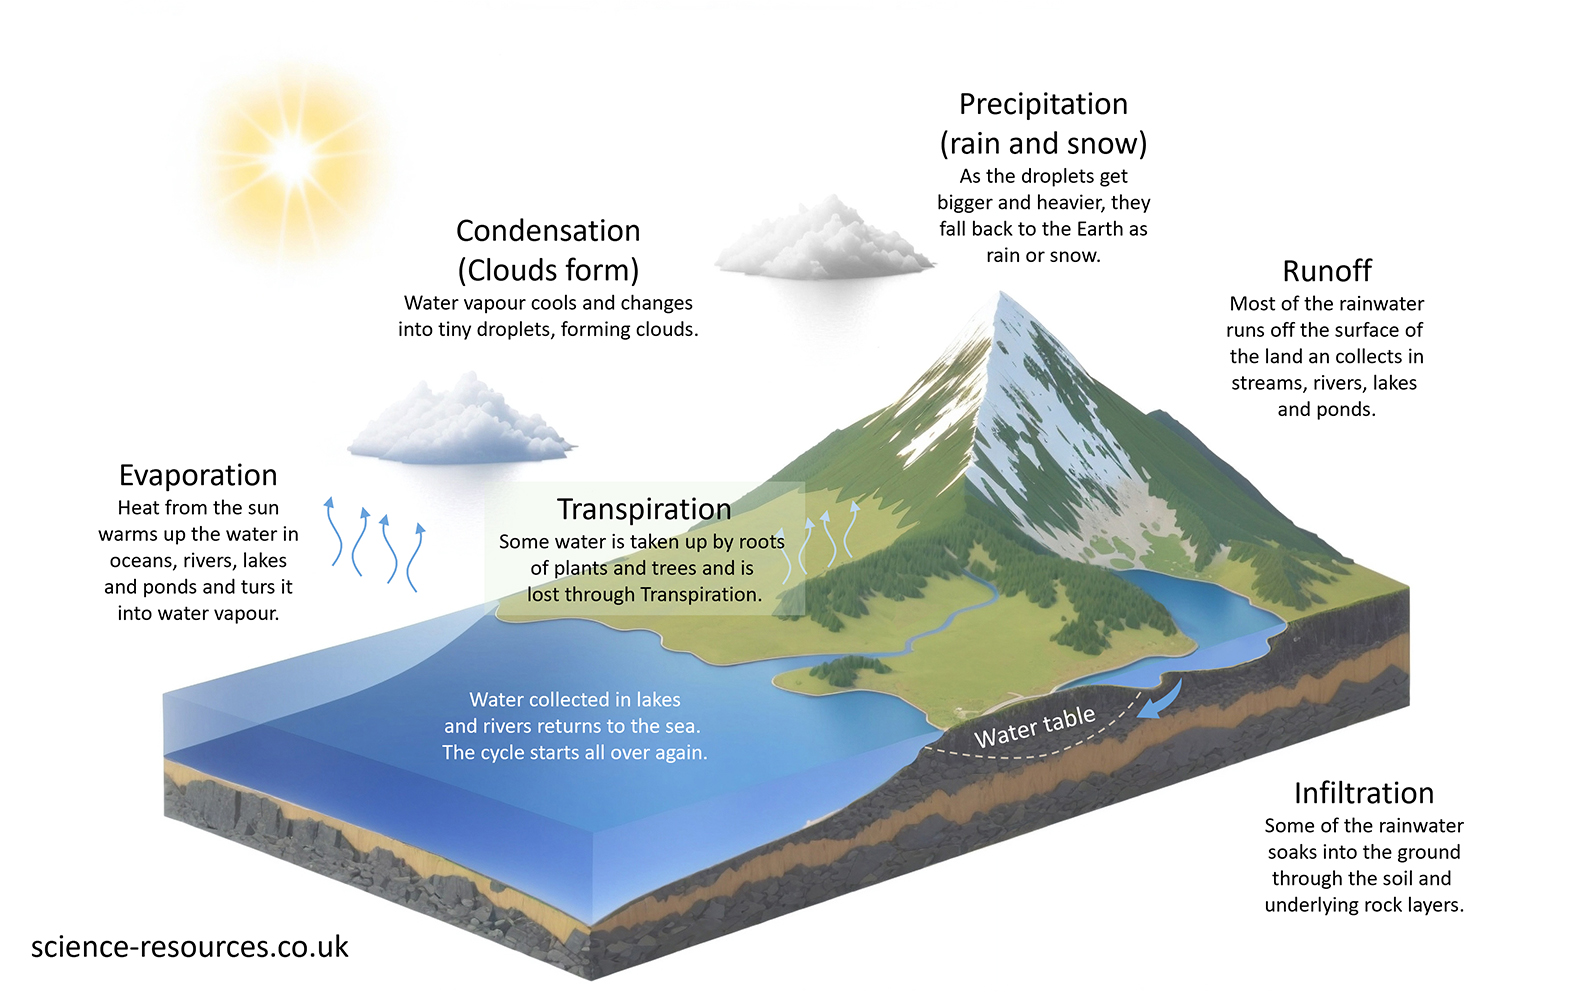 This image is a diagram illustrating the water cycle, including processes like evaporation, condensation, precipitation, runoff, and infiltration.